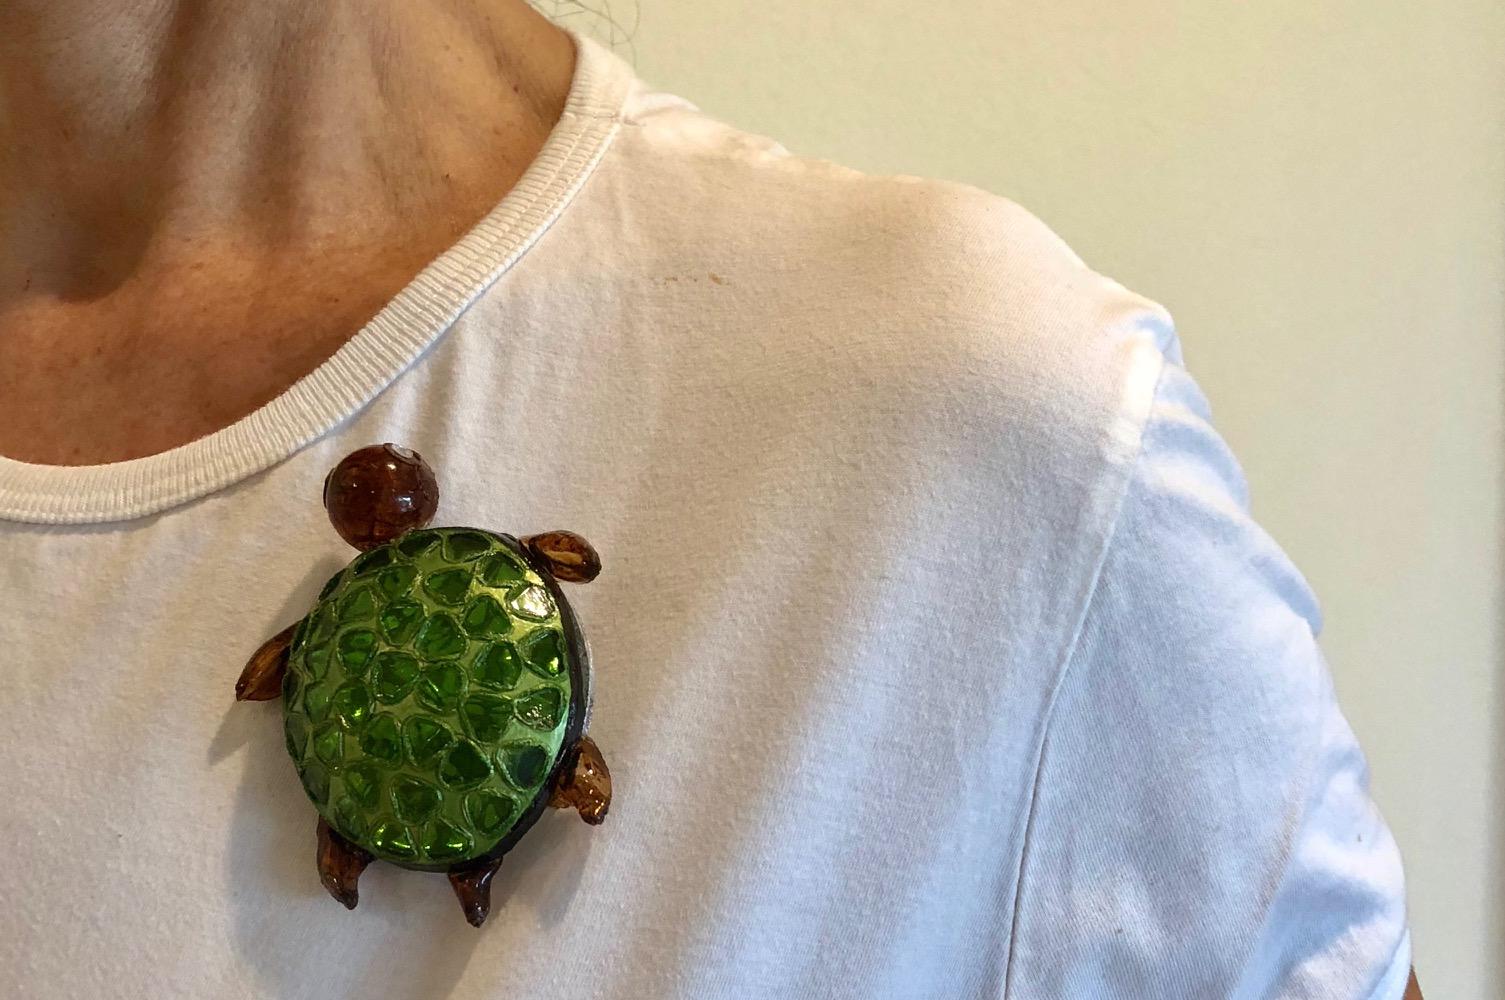 Light and easy to wear, this handmade artisanal pin was made in Paris by Cilea.  The lightweight pin features a single swimming turtle, comprised out of enamel and resin composite). The turtle's three-dimensional oversized body features bright